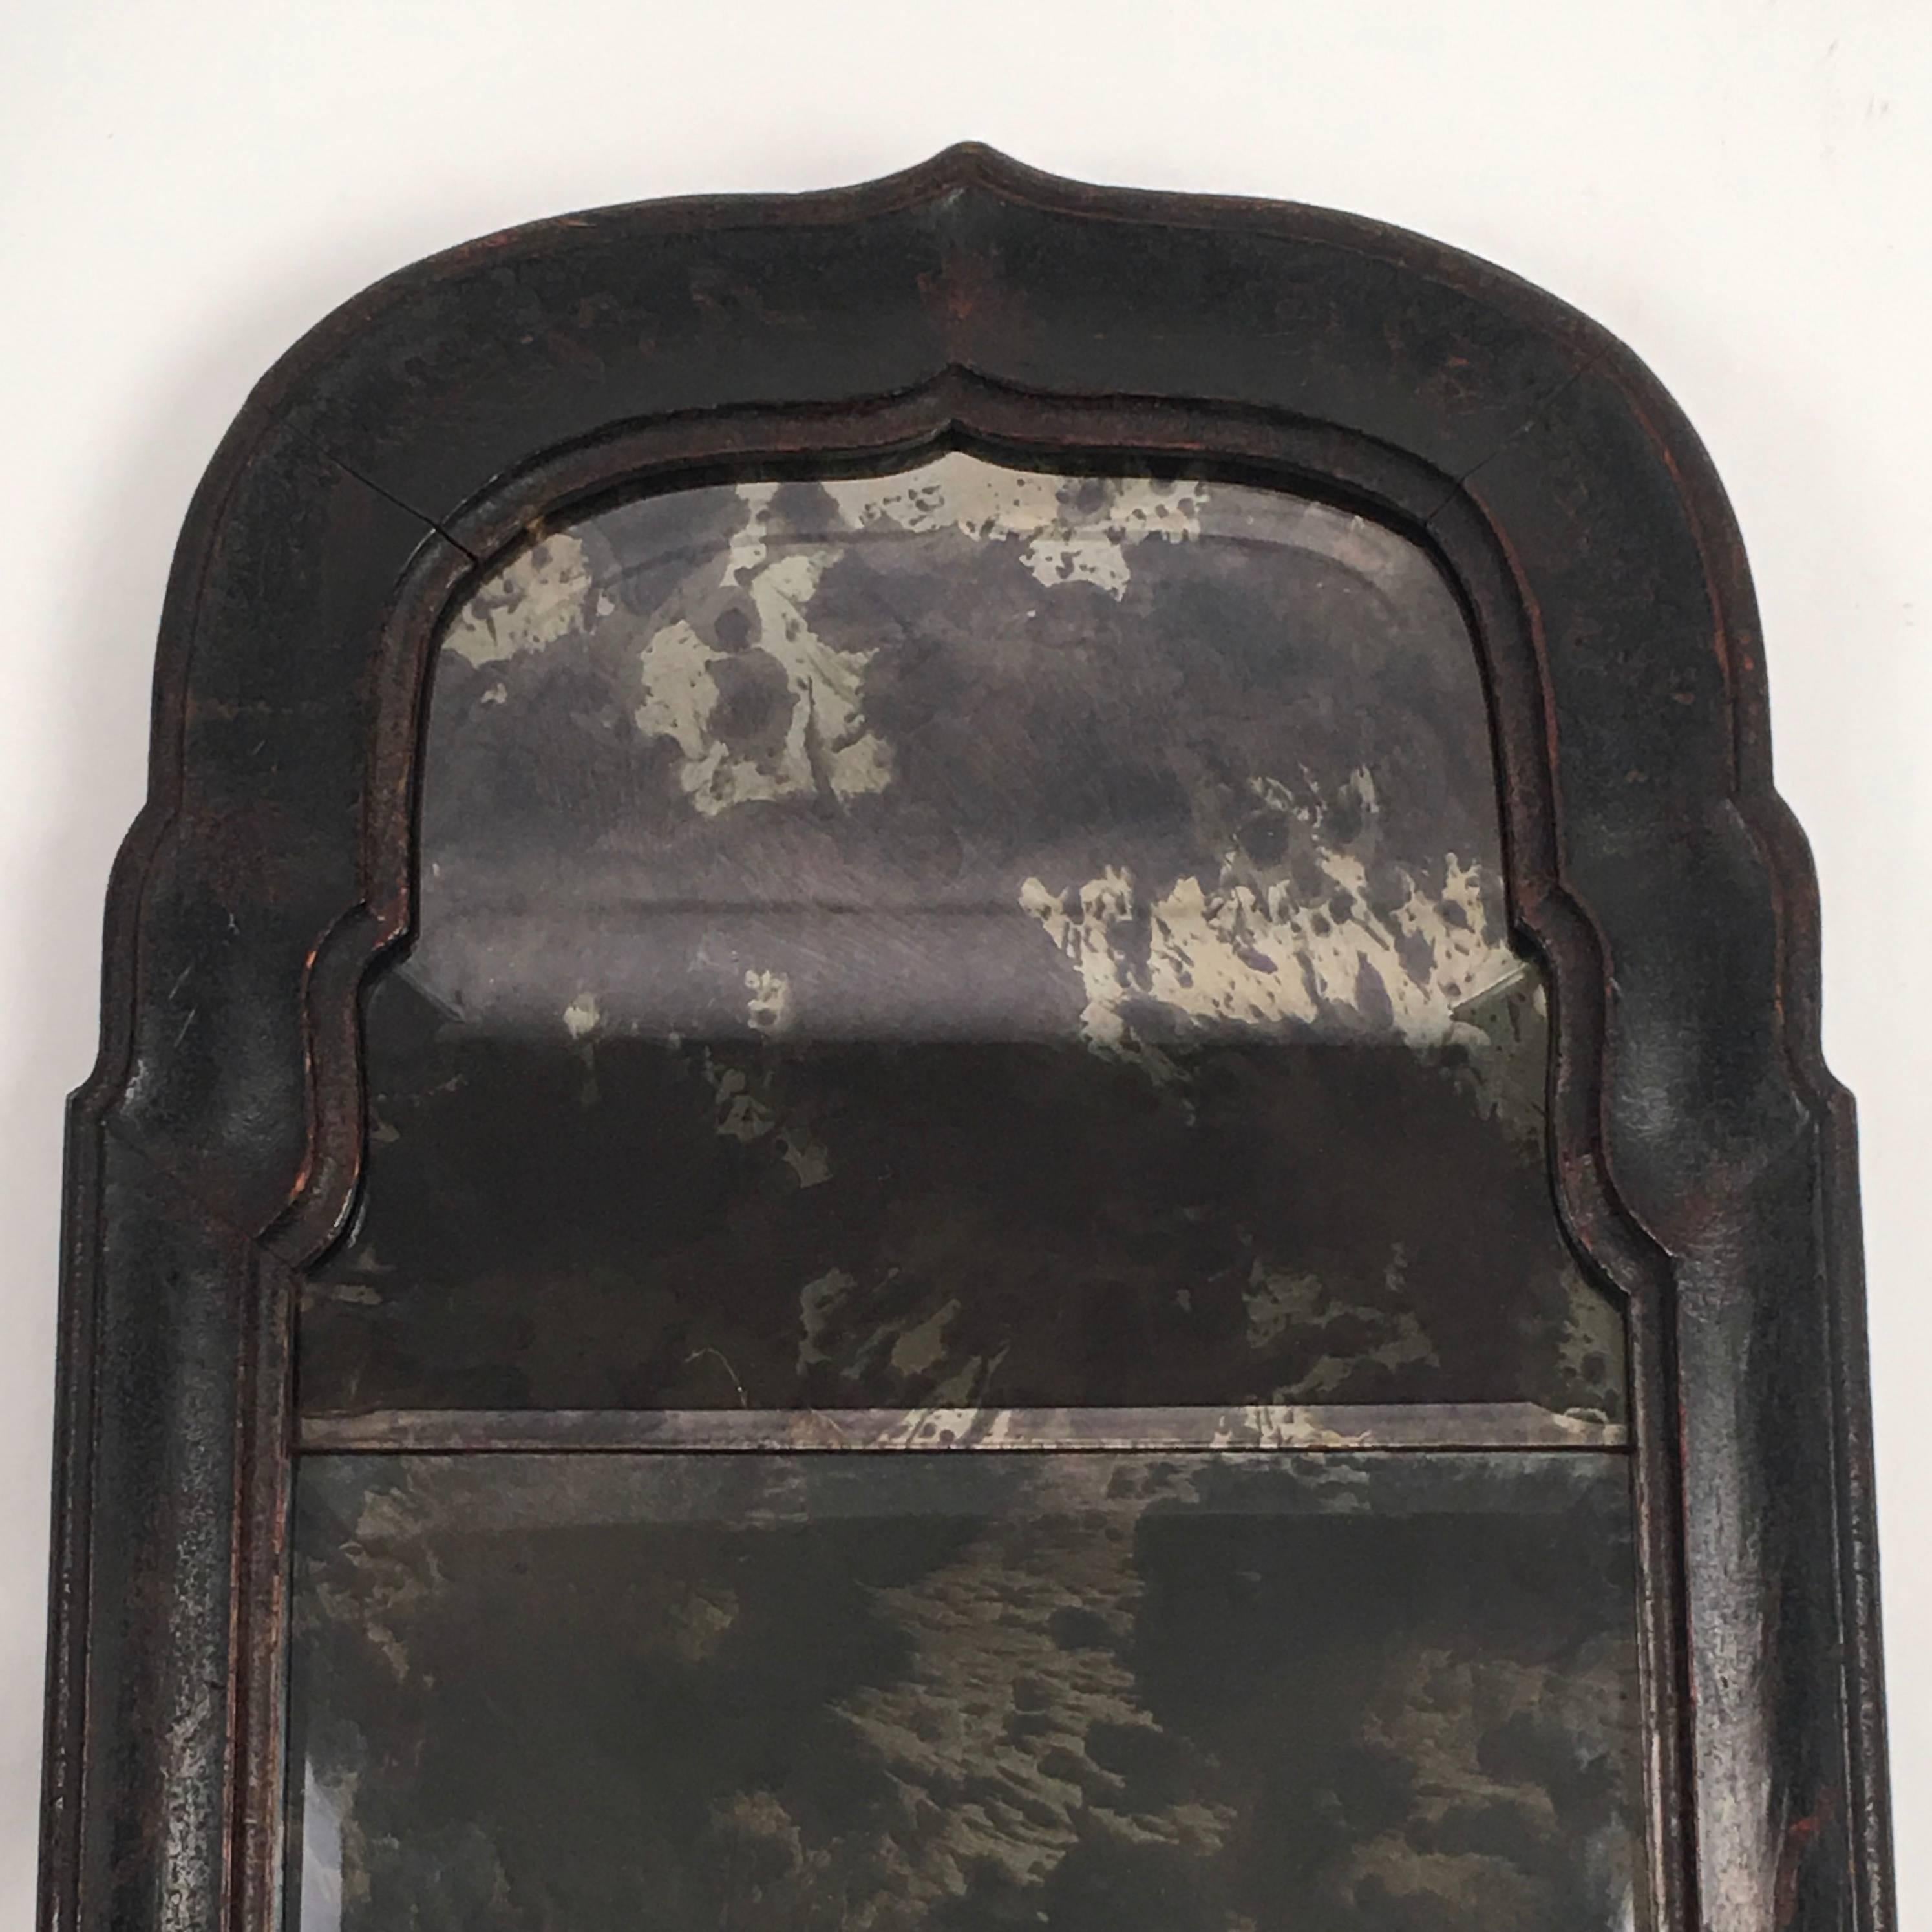 An early Queen Anne period black japanned, or lacquered, chinoiserie decorated mirror, the bracketed arched top over a rectangular lower half, the frame with wonderful bold form and old leathery patina, retaining traces of its original gold painted